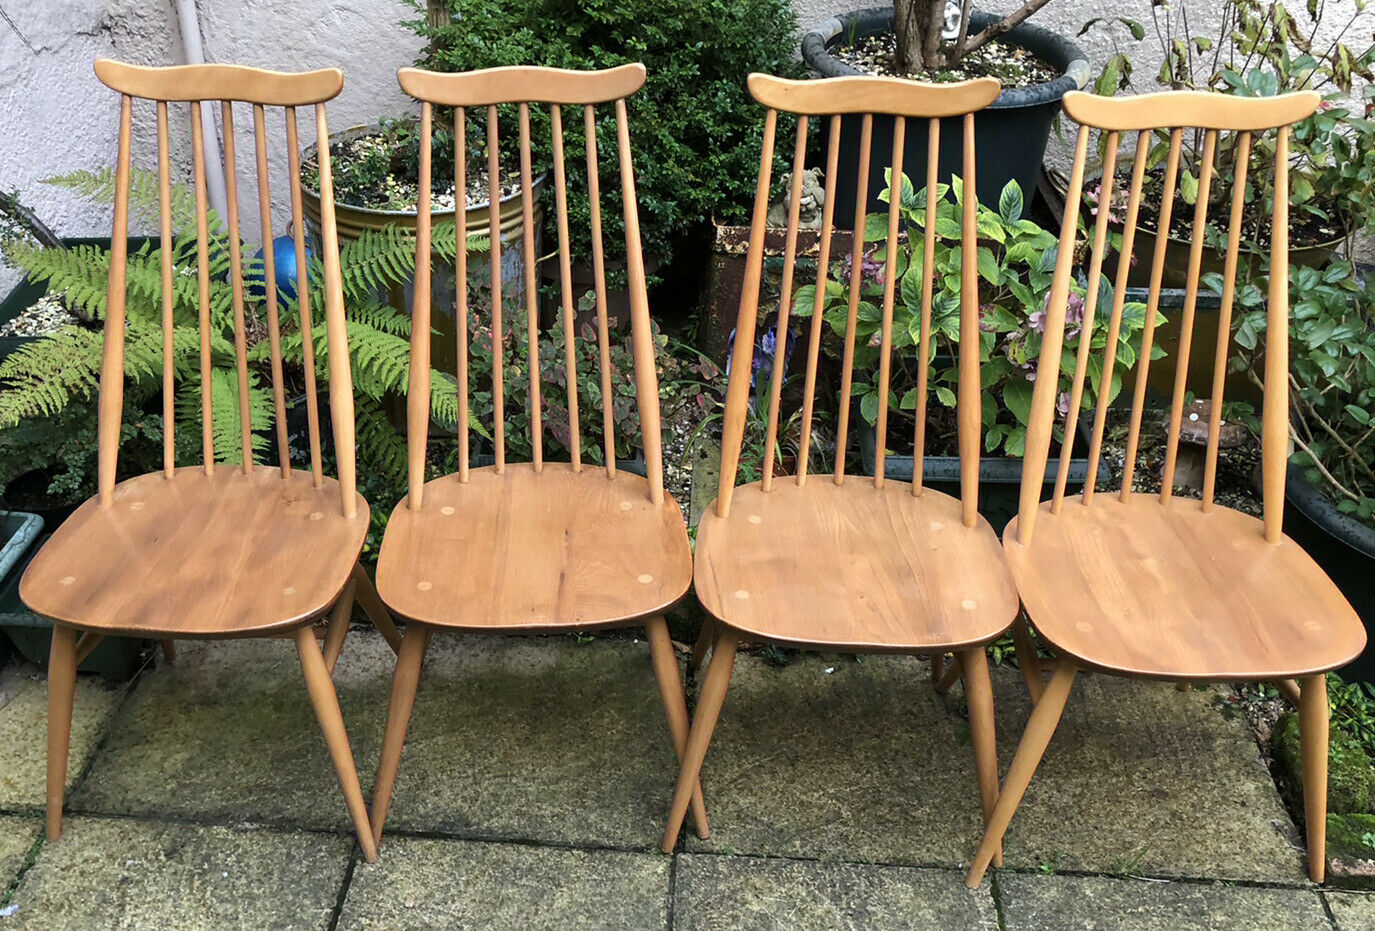 VERY CLEAN CONDITION, Ercol SUPERB SET OF 4 RETRO   ERCOL  DINING CHAIRS 